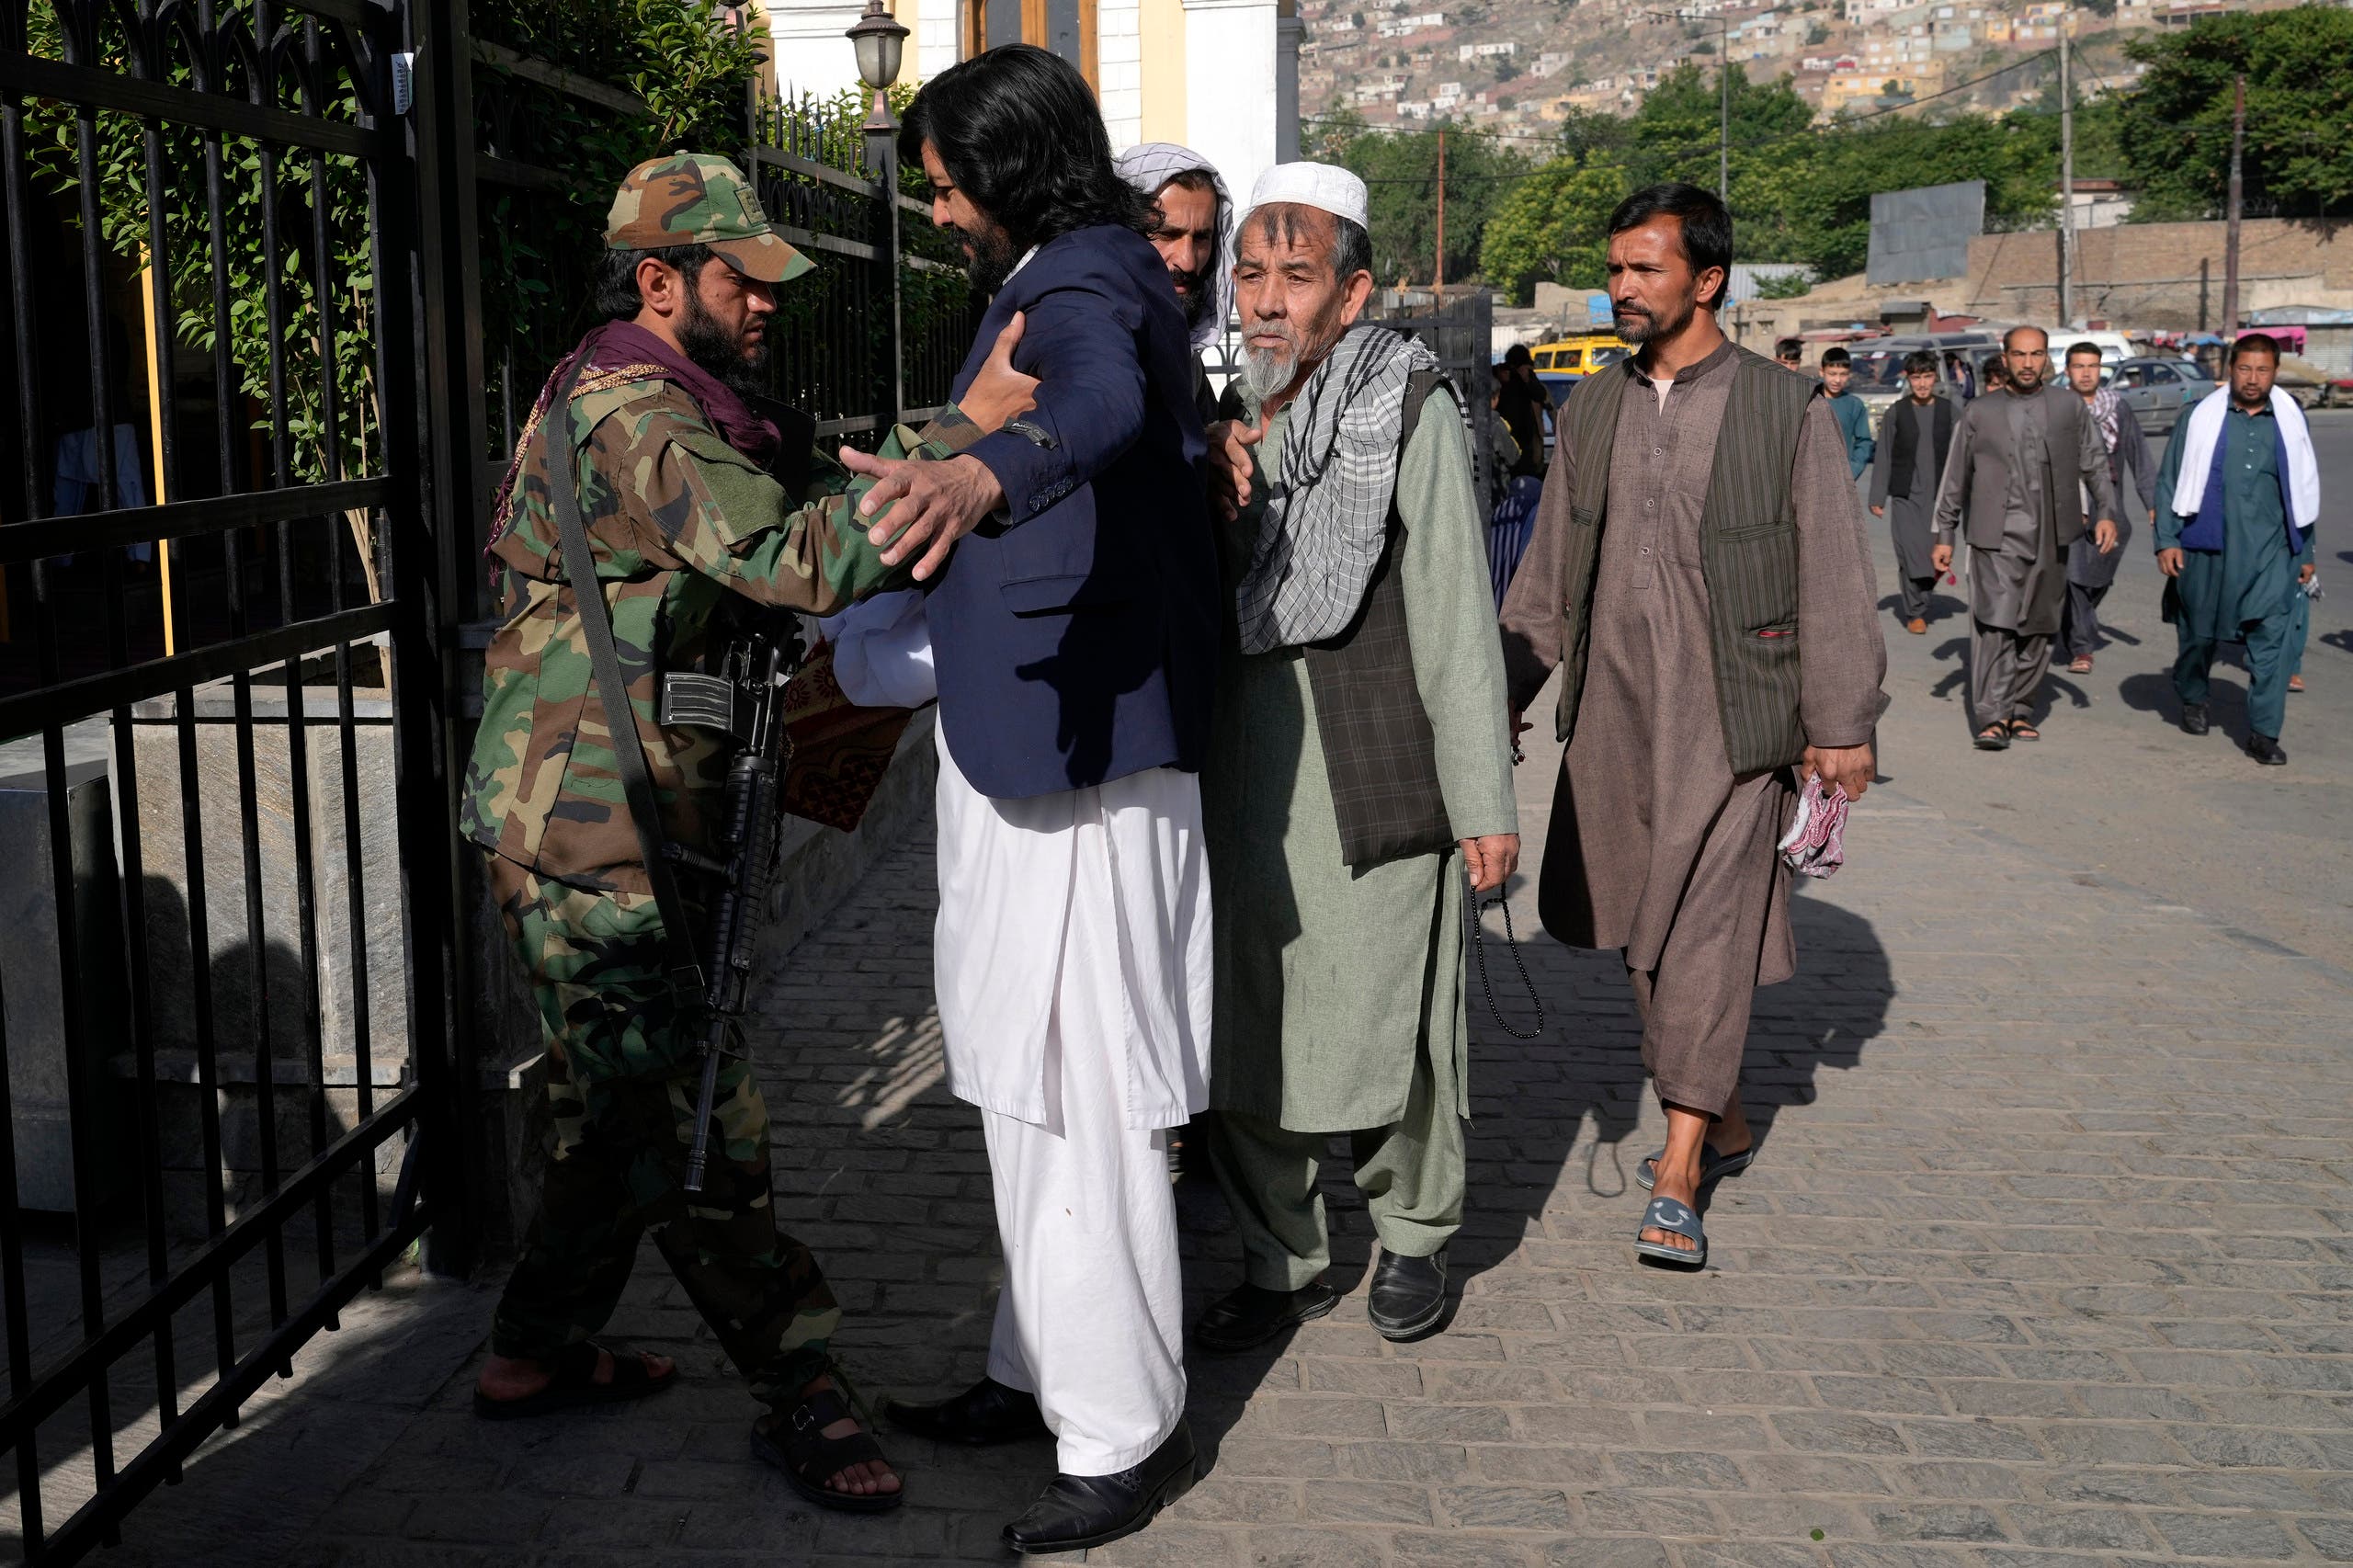 Taliban elements search worshipers today in Kabul